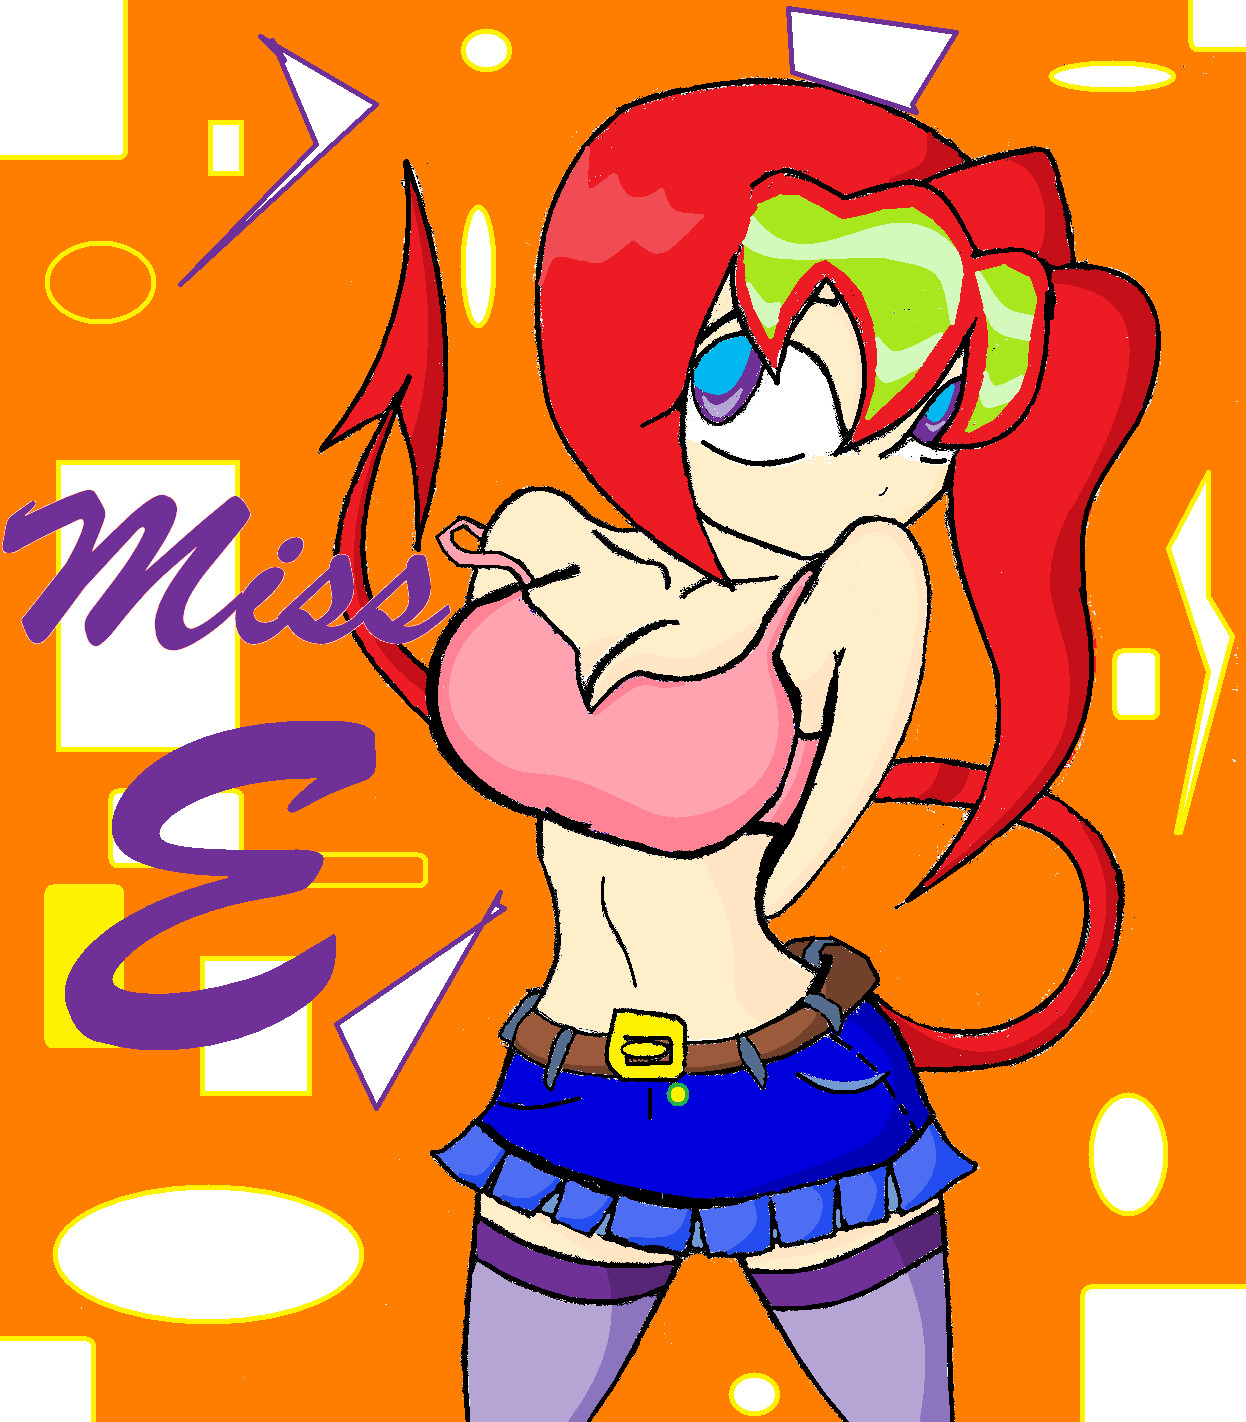 Miss e smexy winner by thingy